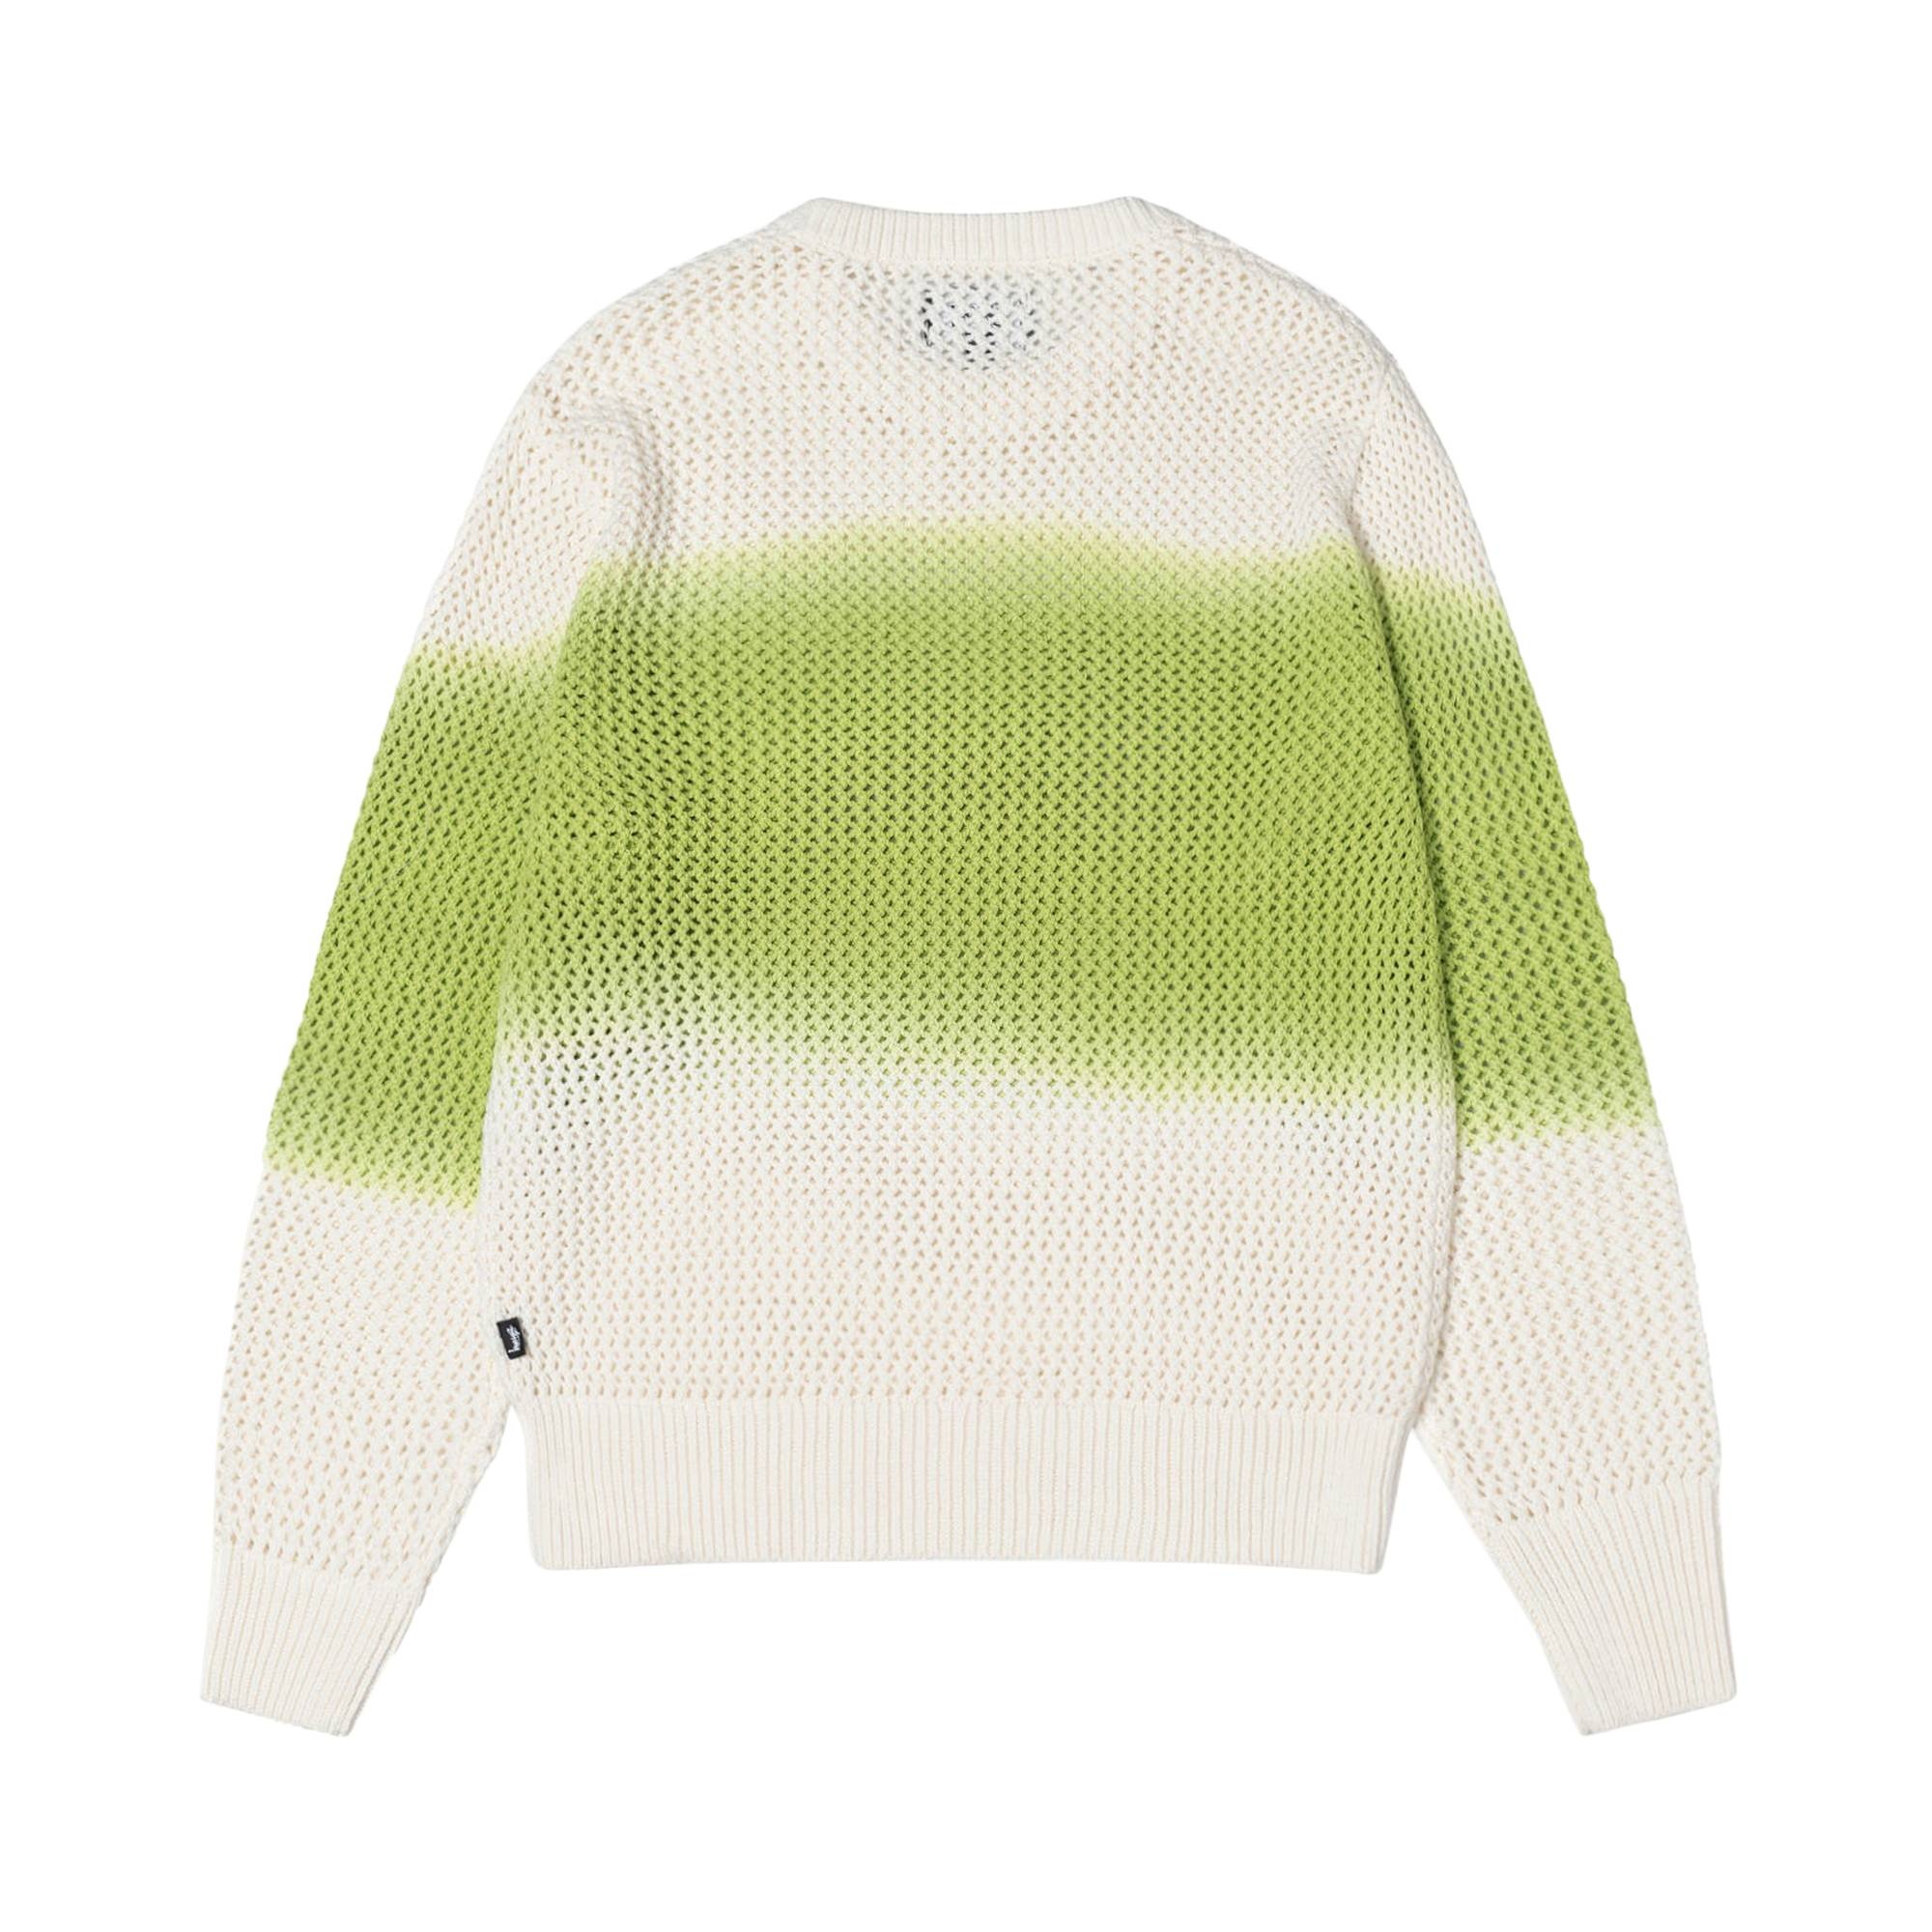 Stussy Pigment Dyed Loose Gauge Sweater 'Bright Green' - 2